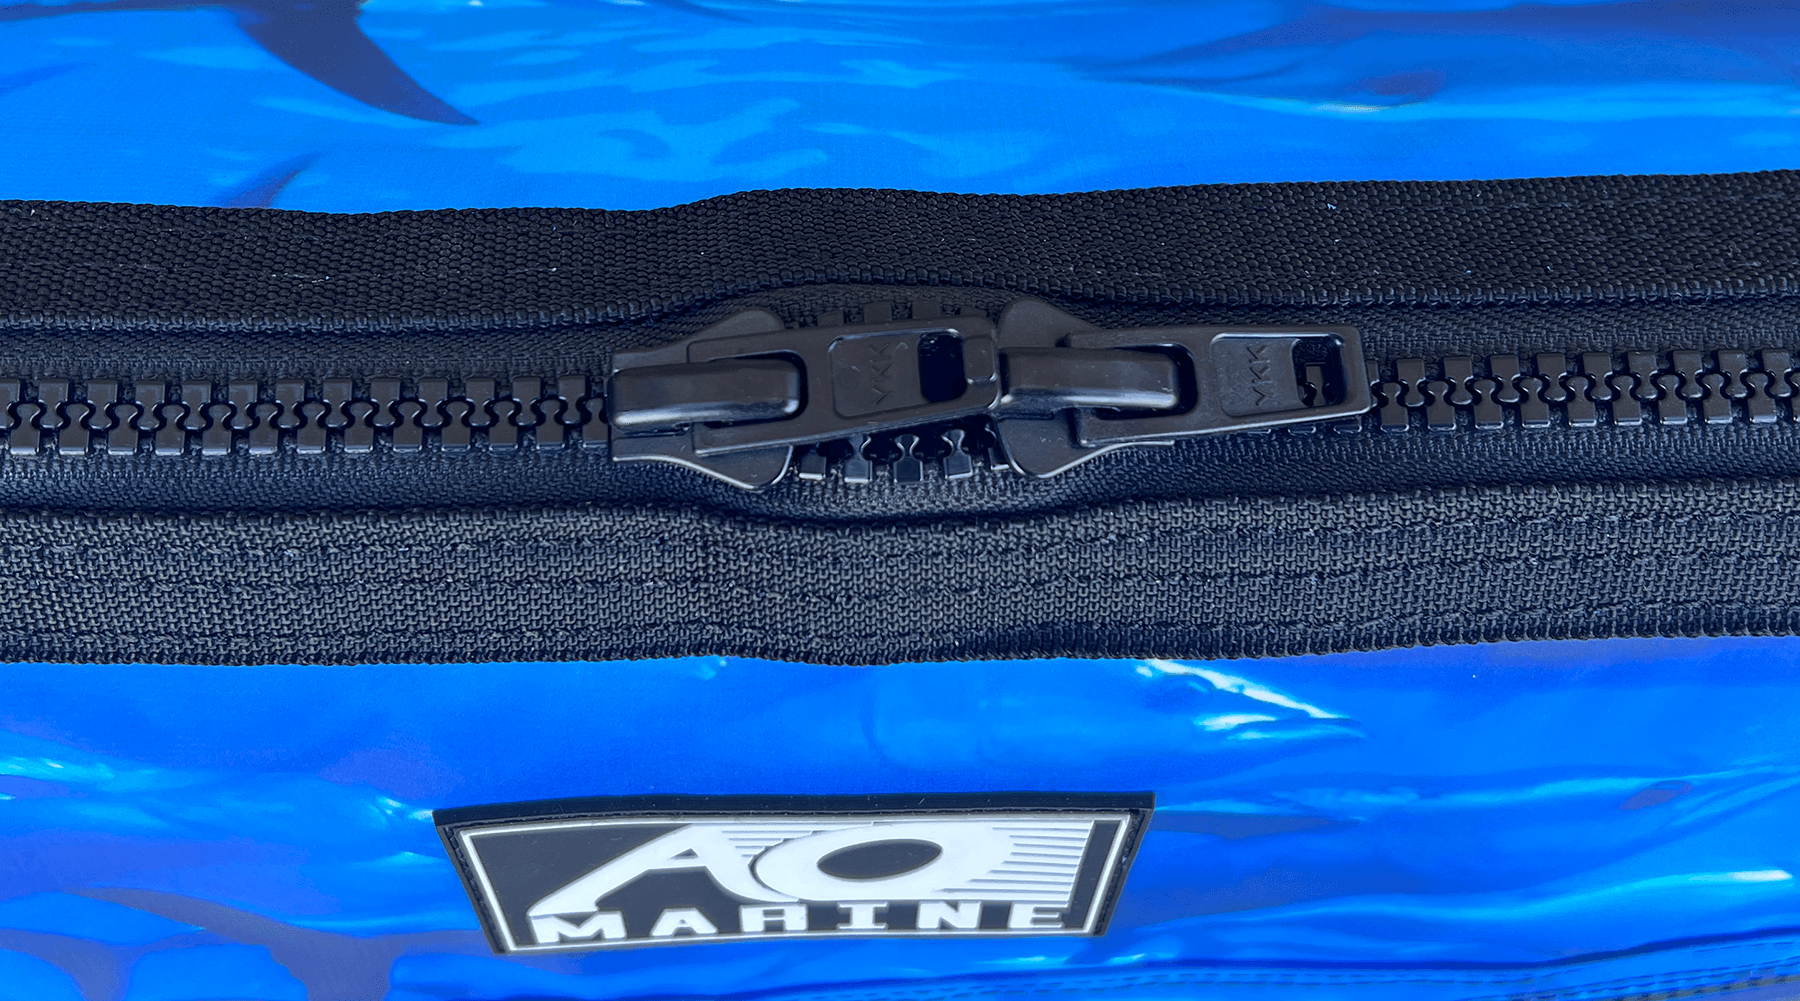 Custom Fish Cooler Bag Insulated - The One Packing Solution